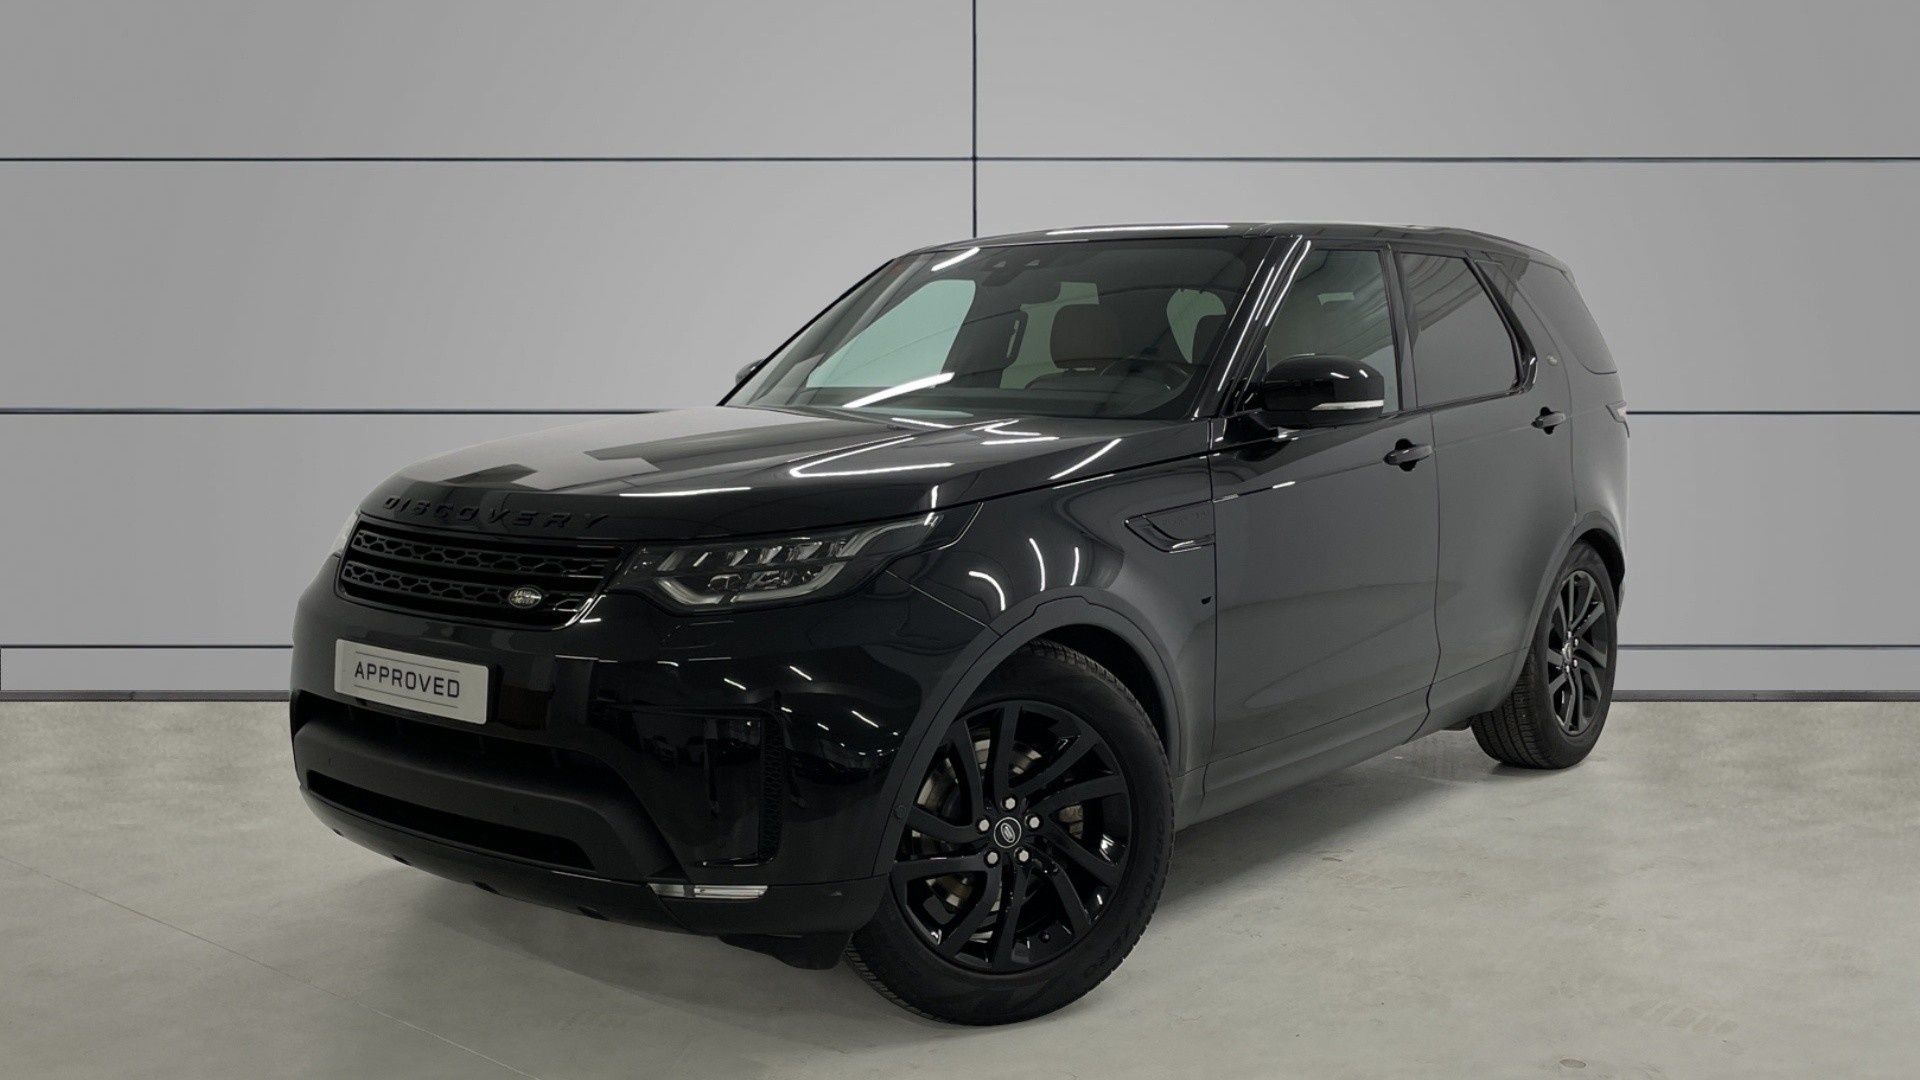 Land Rover Discovery 3.0 TD6 HSE Auto 190 kW (258 CV)